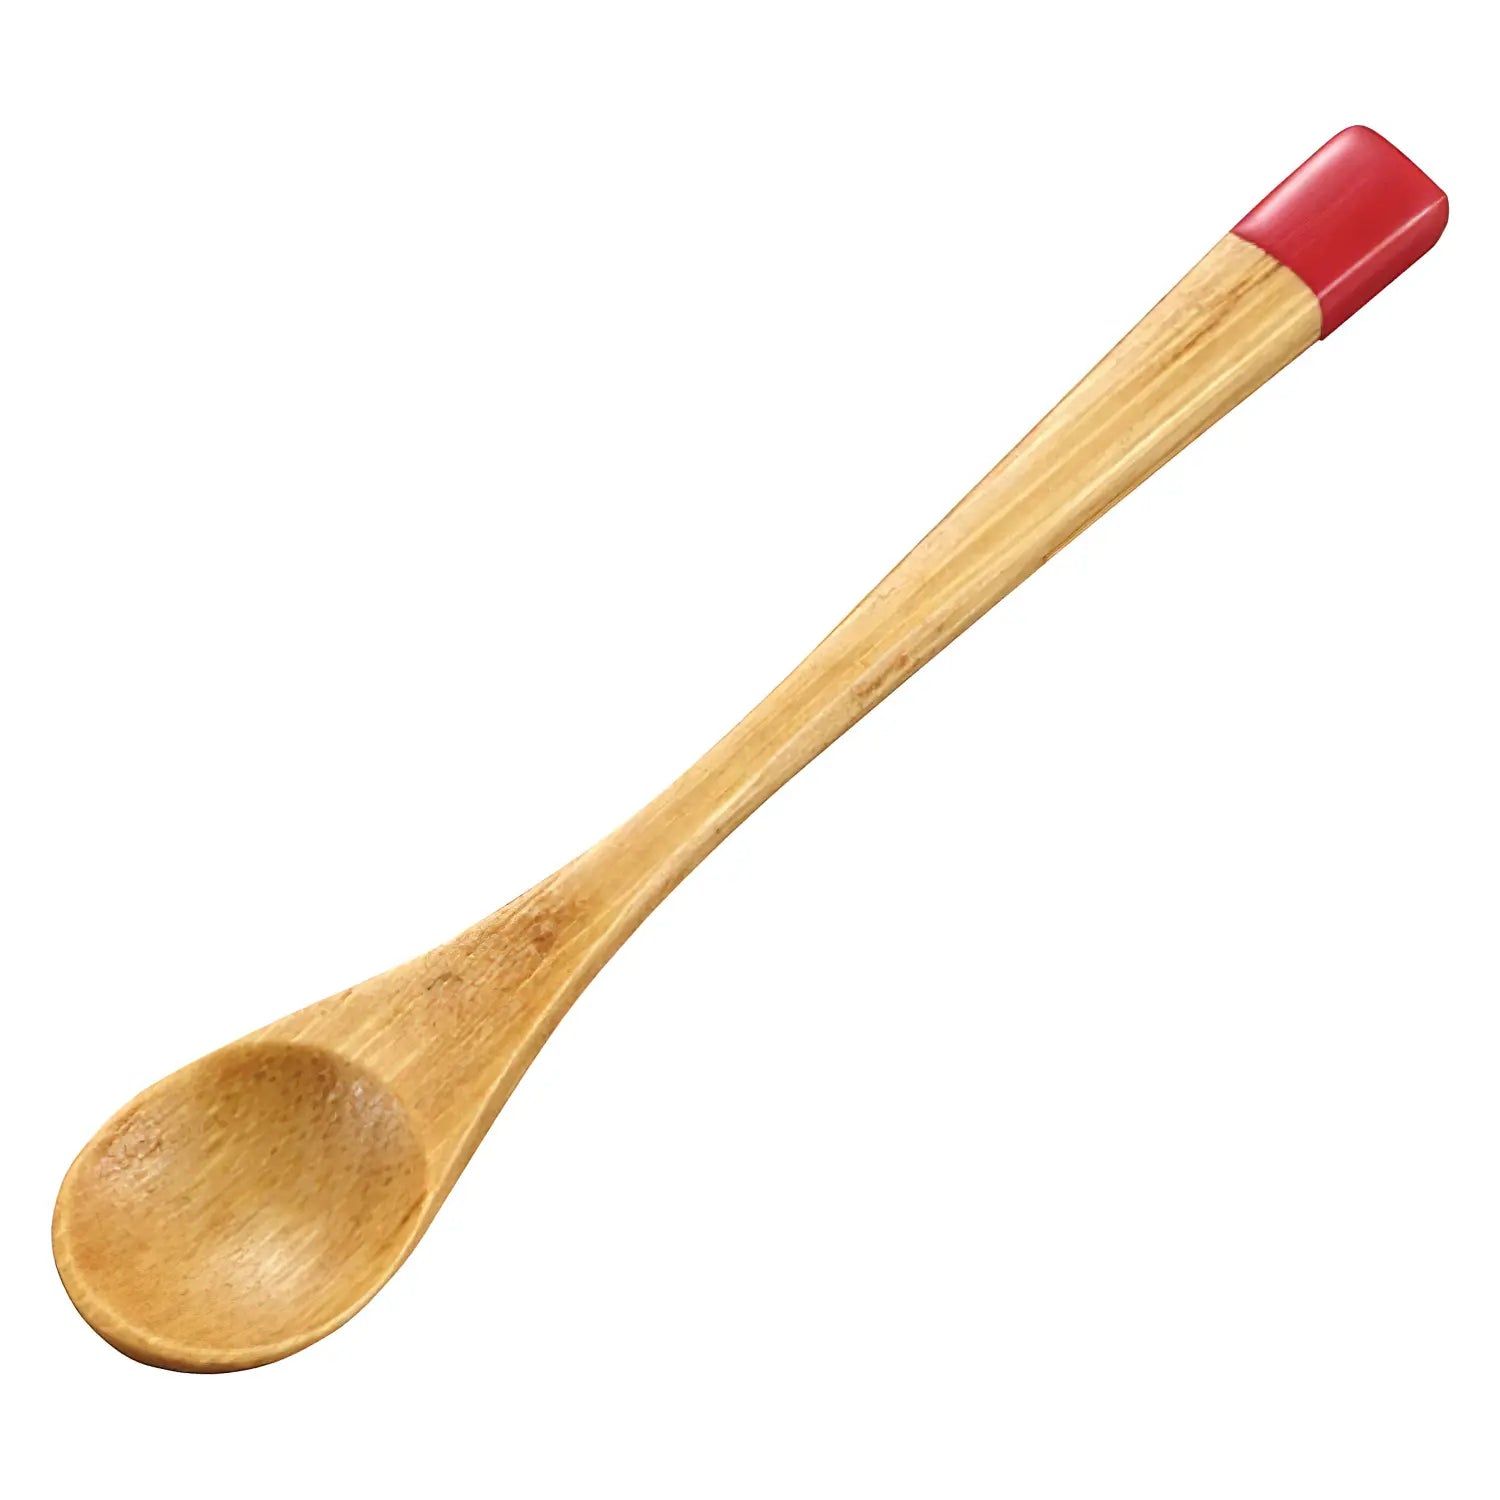 Bamboo Lacquered Condiments Spoon - Premium Quality for Enhanced Dining Experience